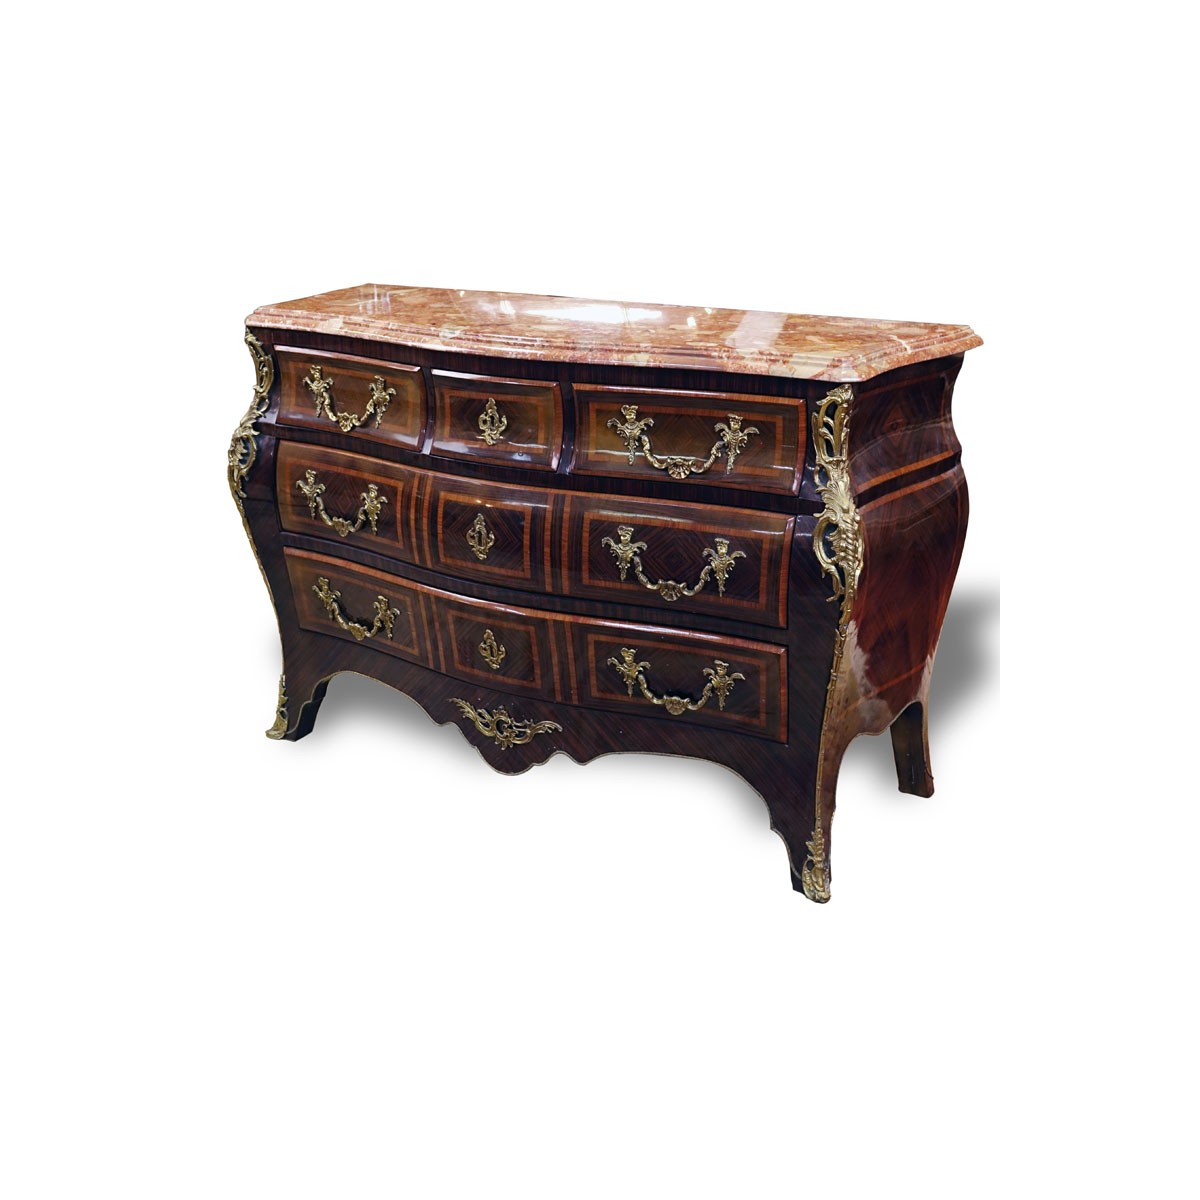 Mid 20th Century Regence Style Gilt Bronze Mounted Kingwood Marquetry Inlaid Marble Top Commode en